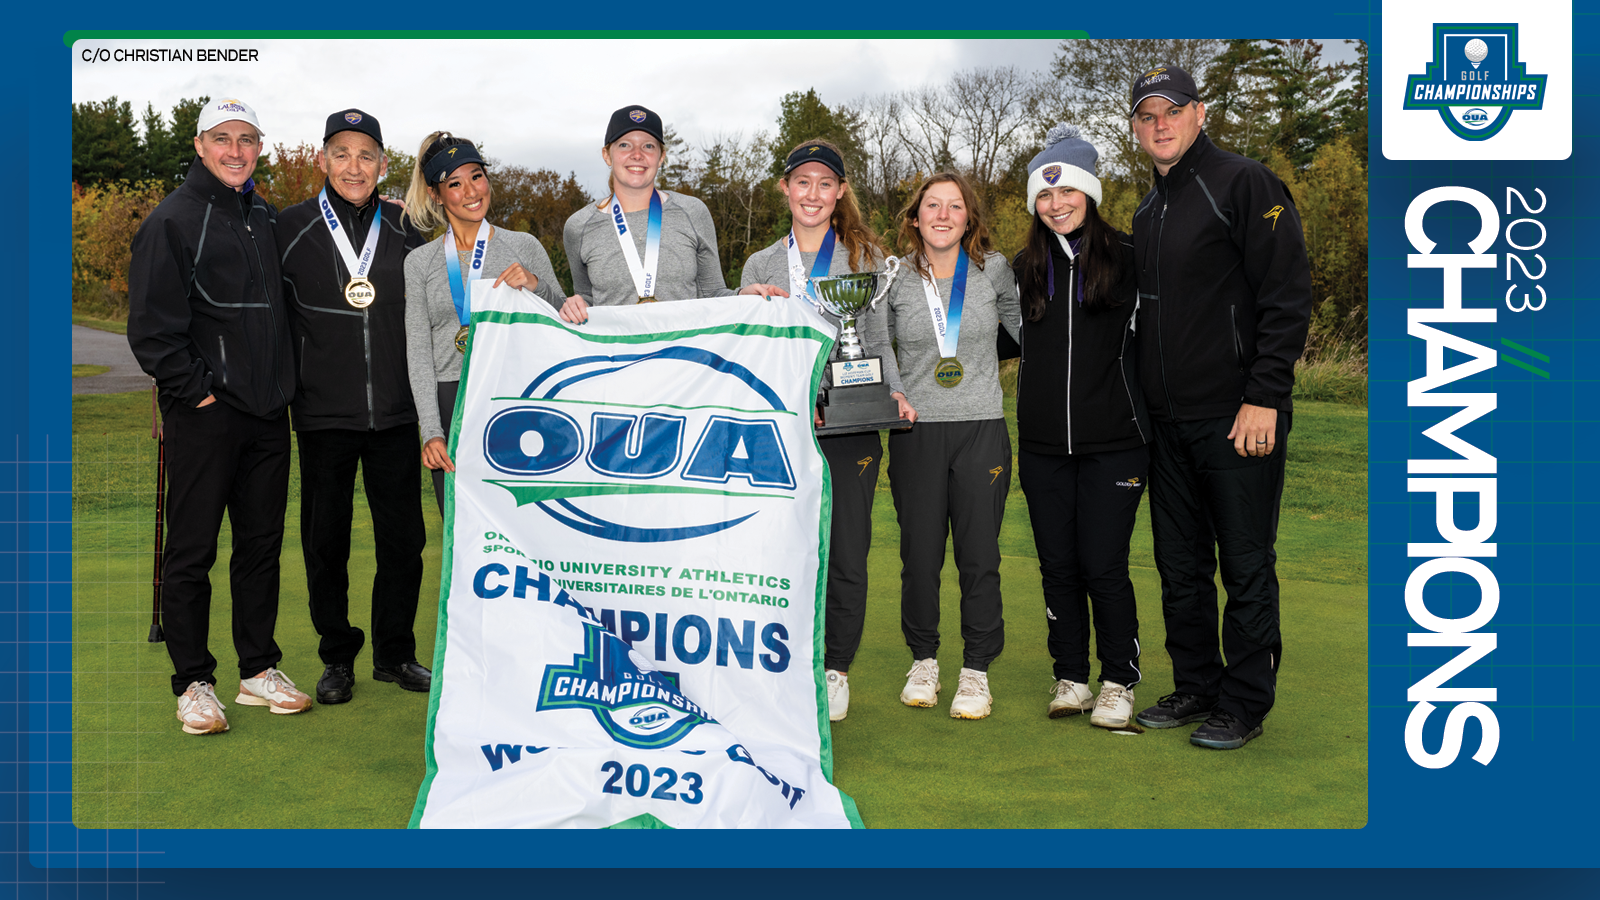 Predominantly blue graphic covered mostly by 2023 OUA Women's Golf Championship banner photo, with the corresponding championship logo and white text reading '2023 Champions' on the right side